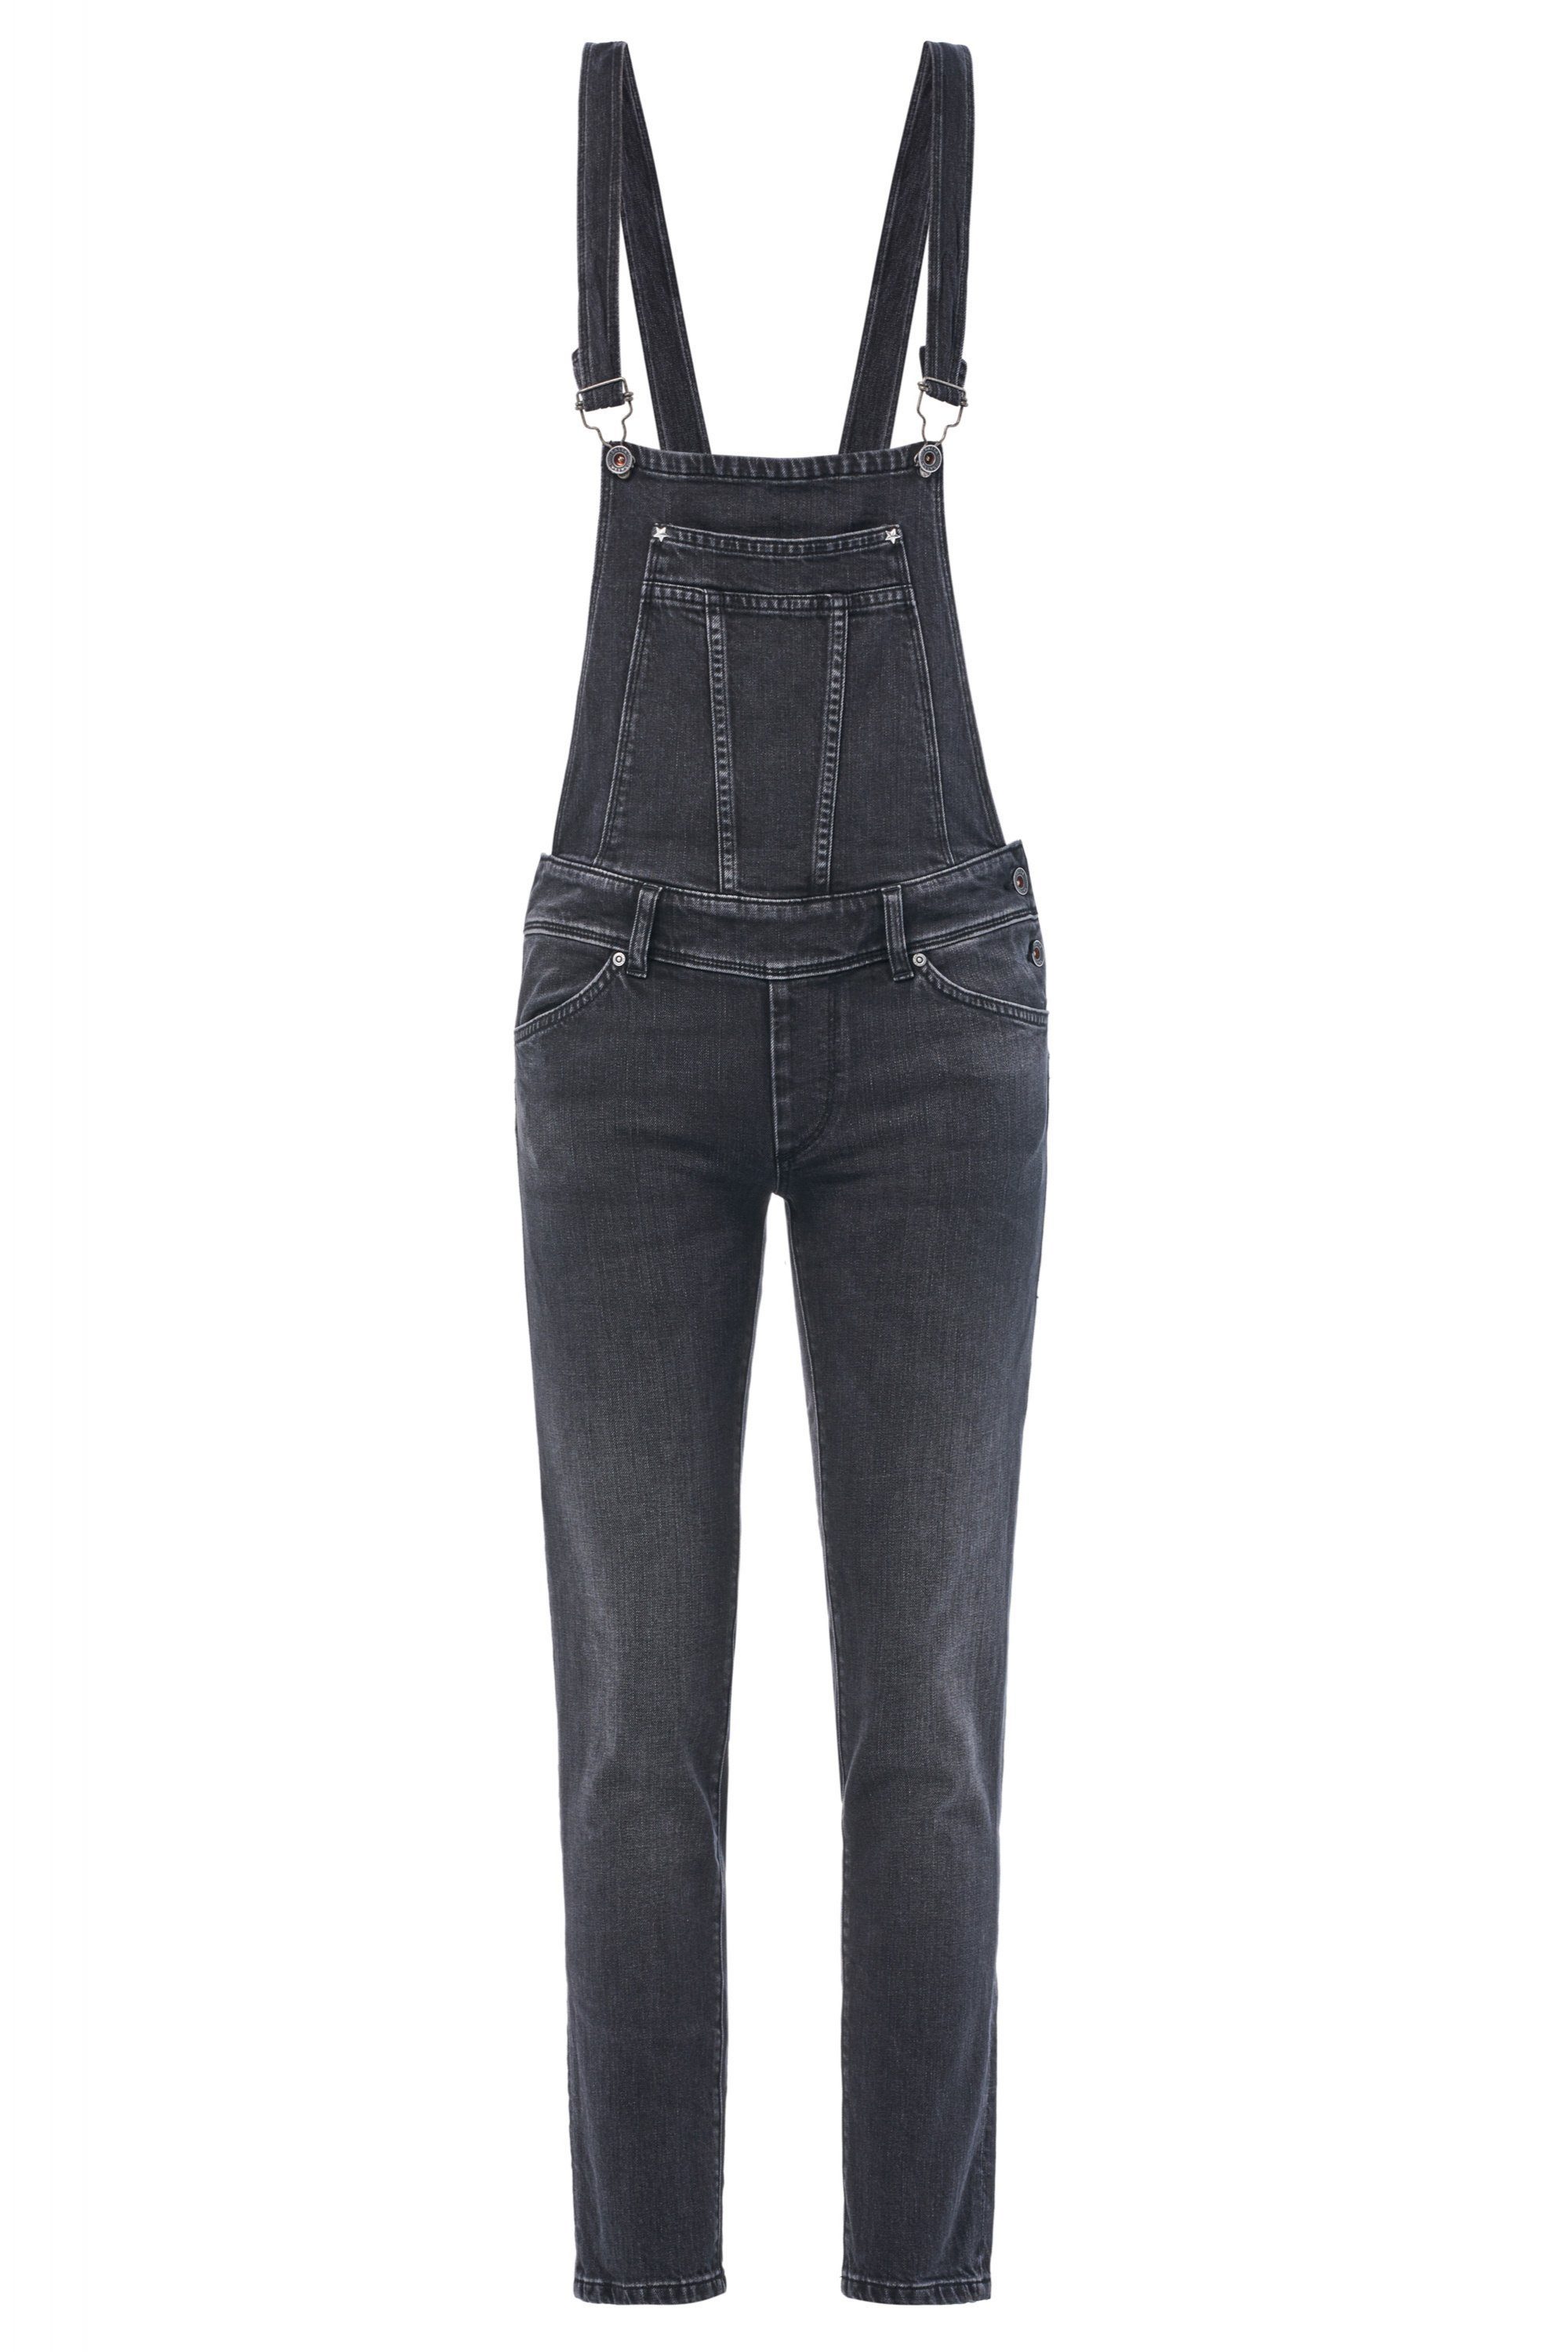 grey out Stretch-Jeans JEANS OVERALL washed WONDER UP SALSA PUSH Salsa 123892.0000 CAPRI